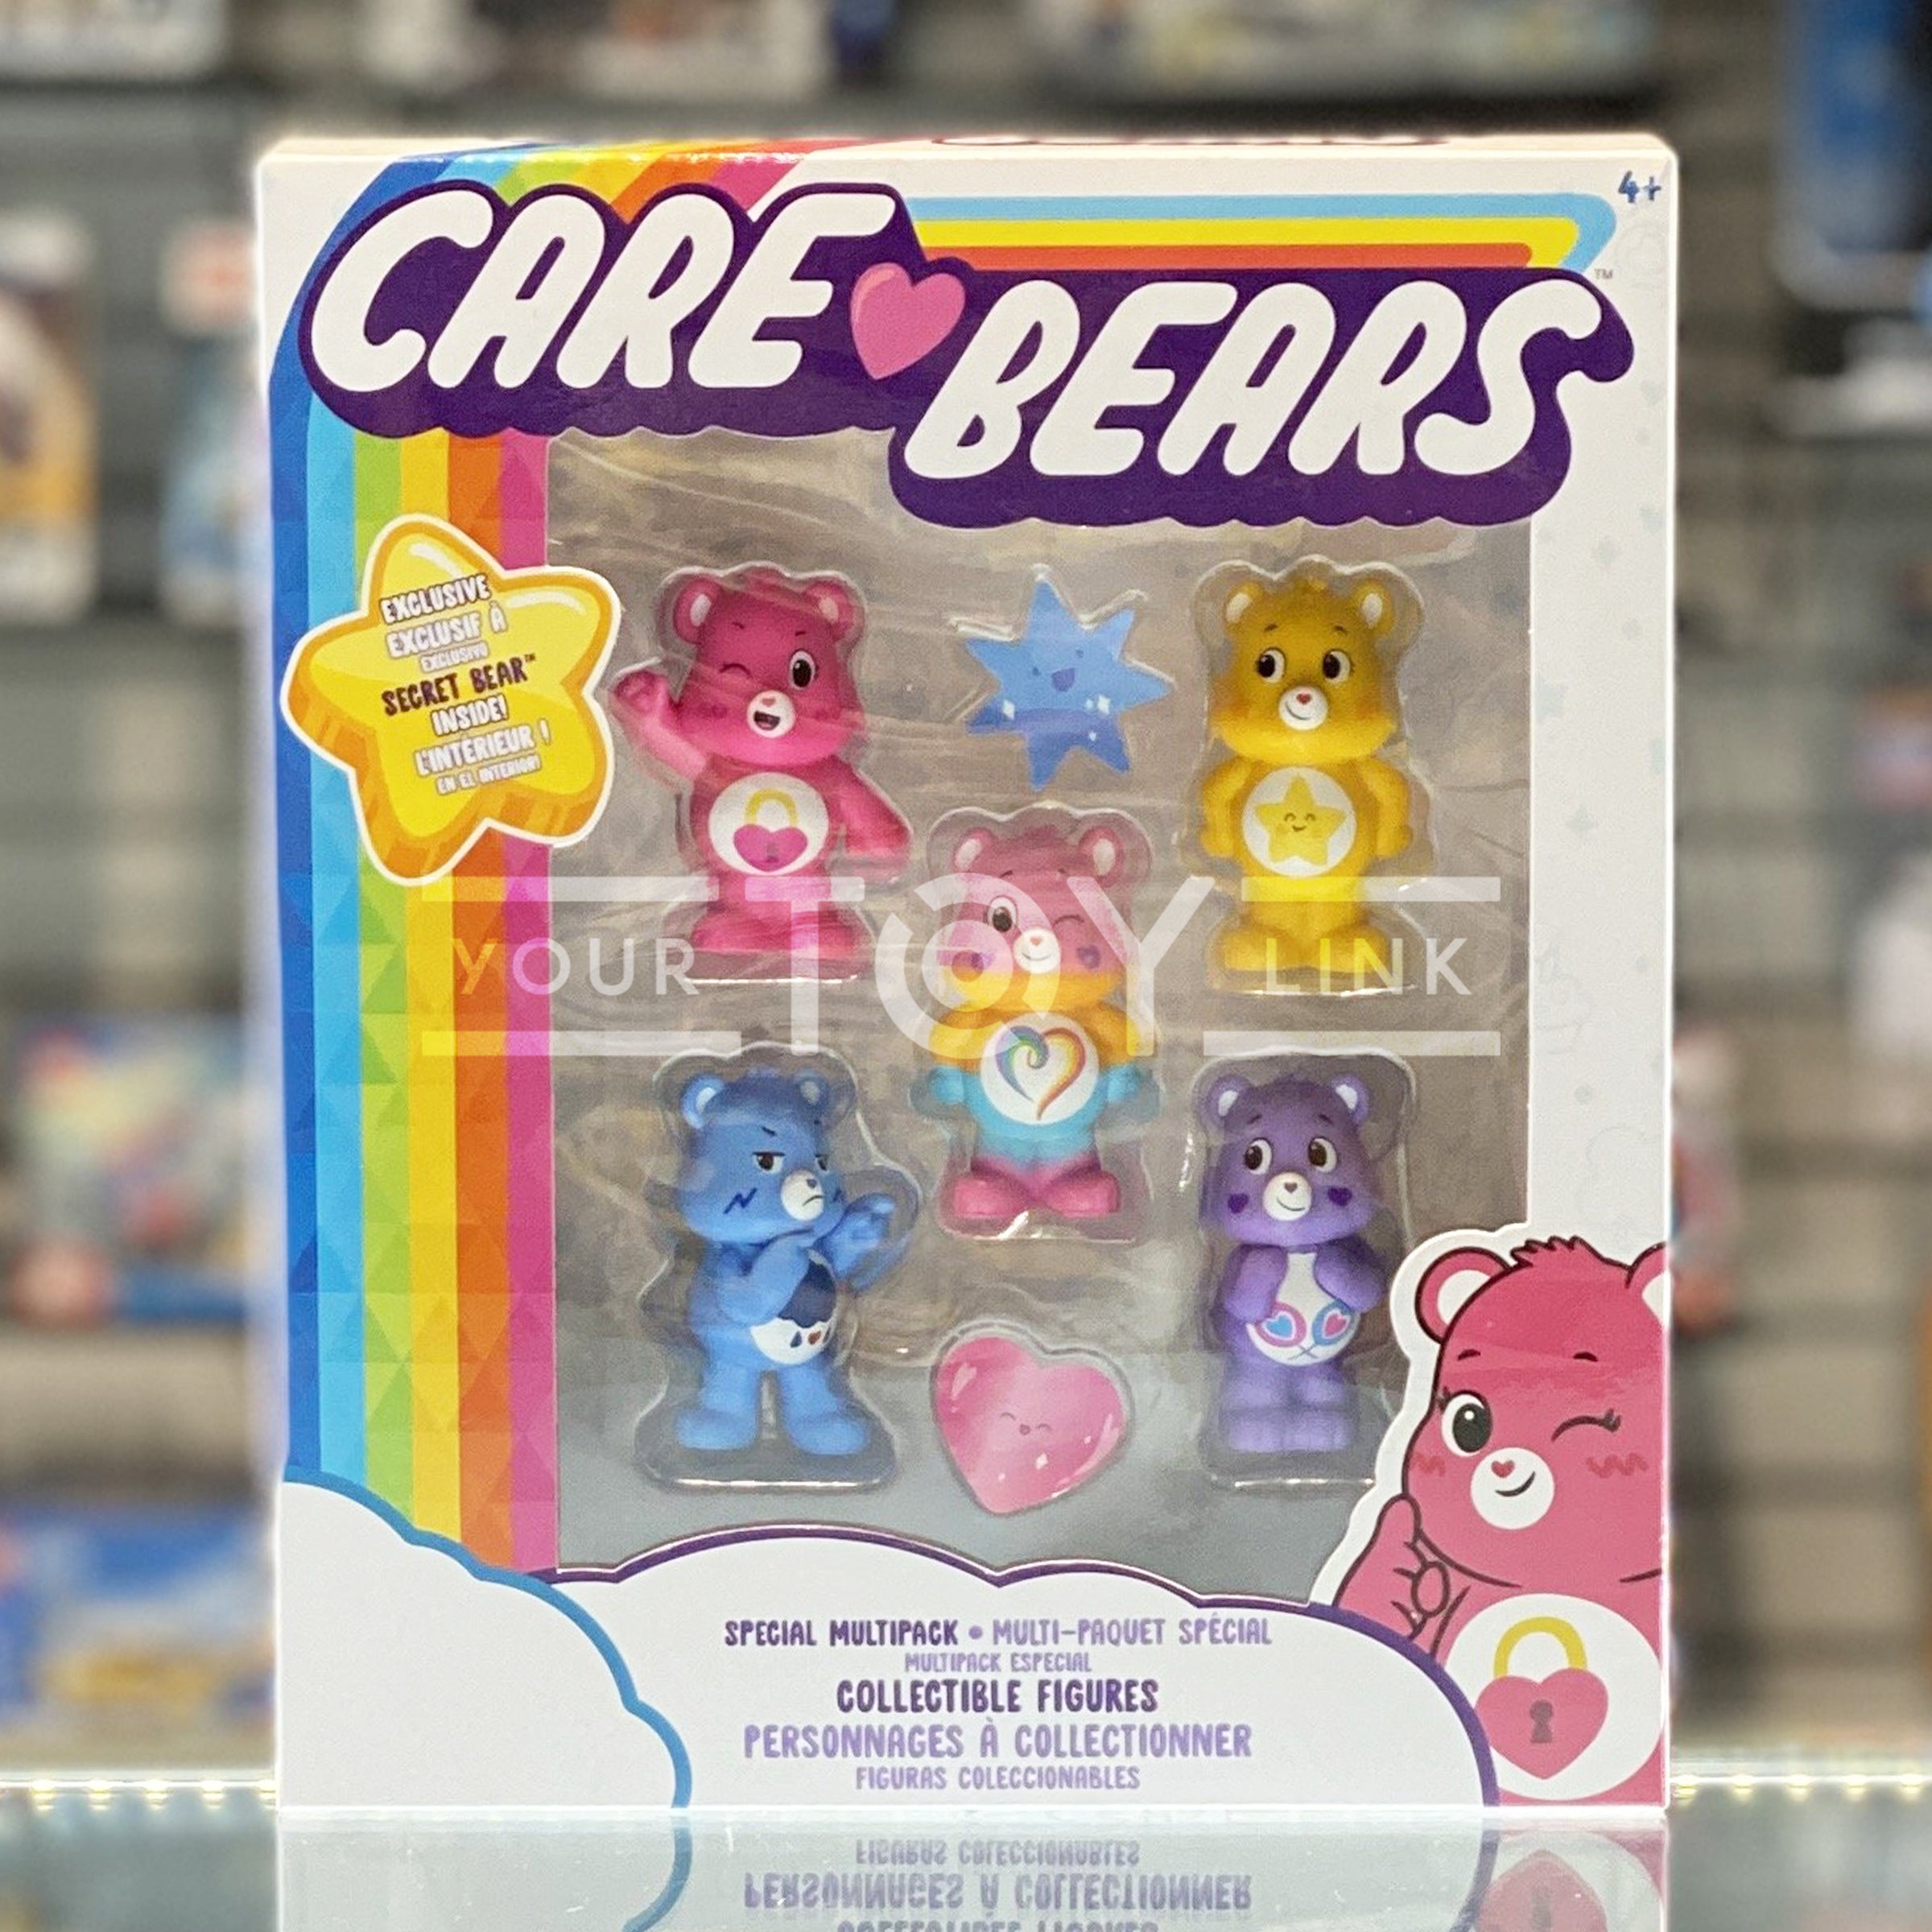 Care Bears Collectible Figures – Your Toy Link